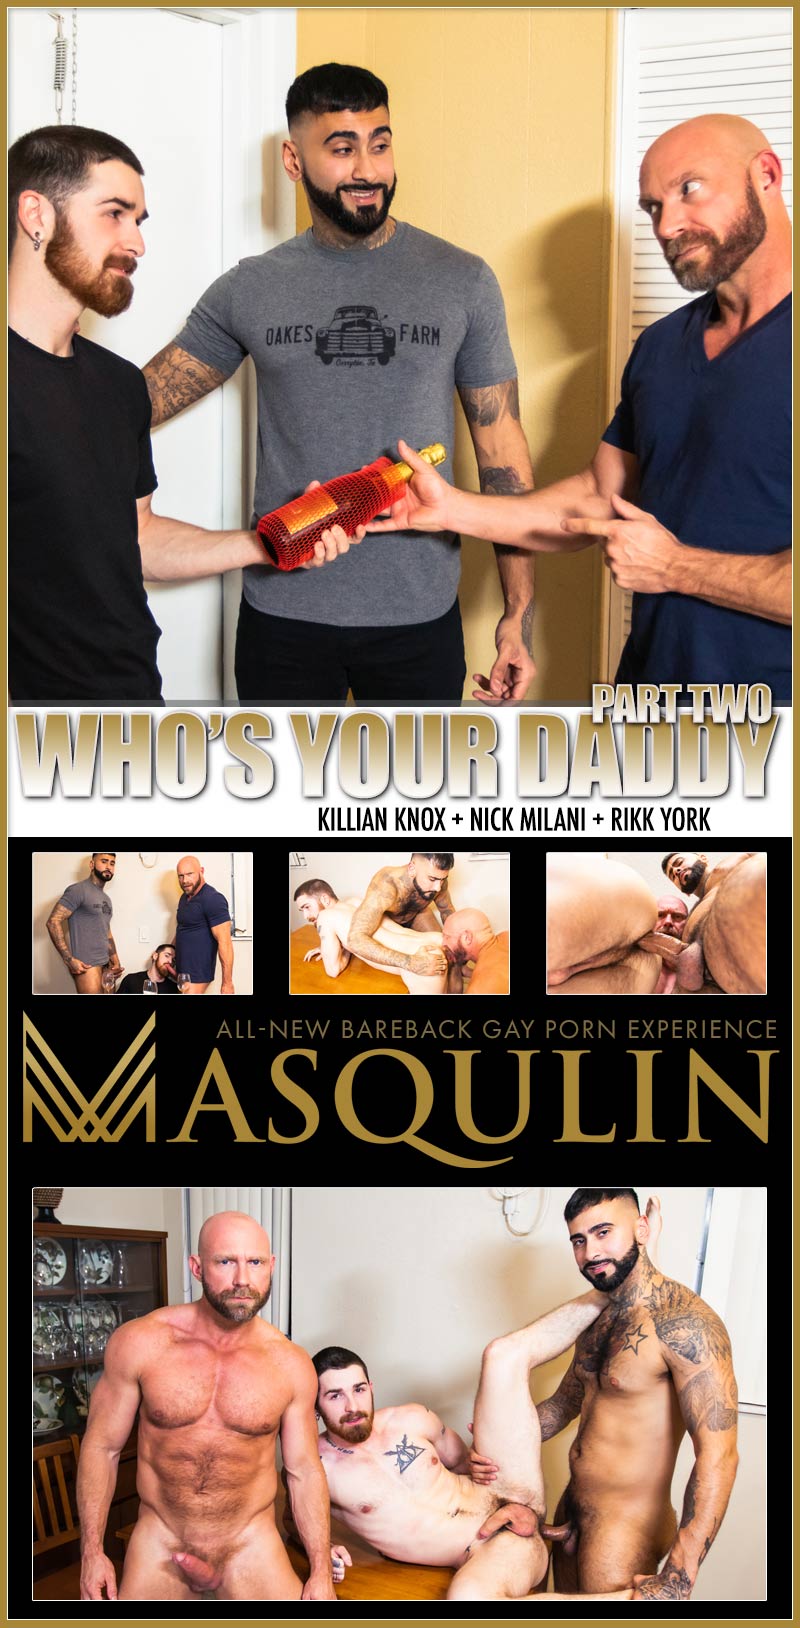 Who's Your Daddy?, Part 2 (Killian Knox, Nick Milani and Rikk York) on MASQULIN